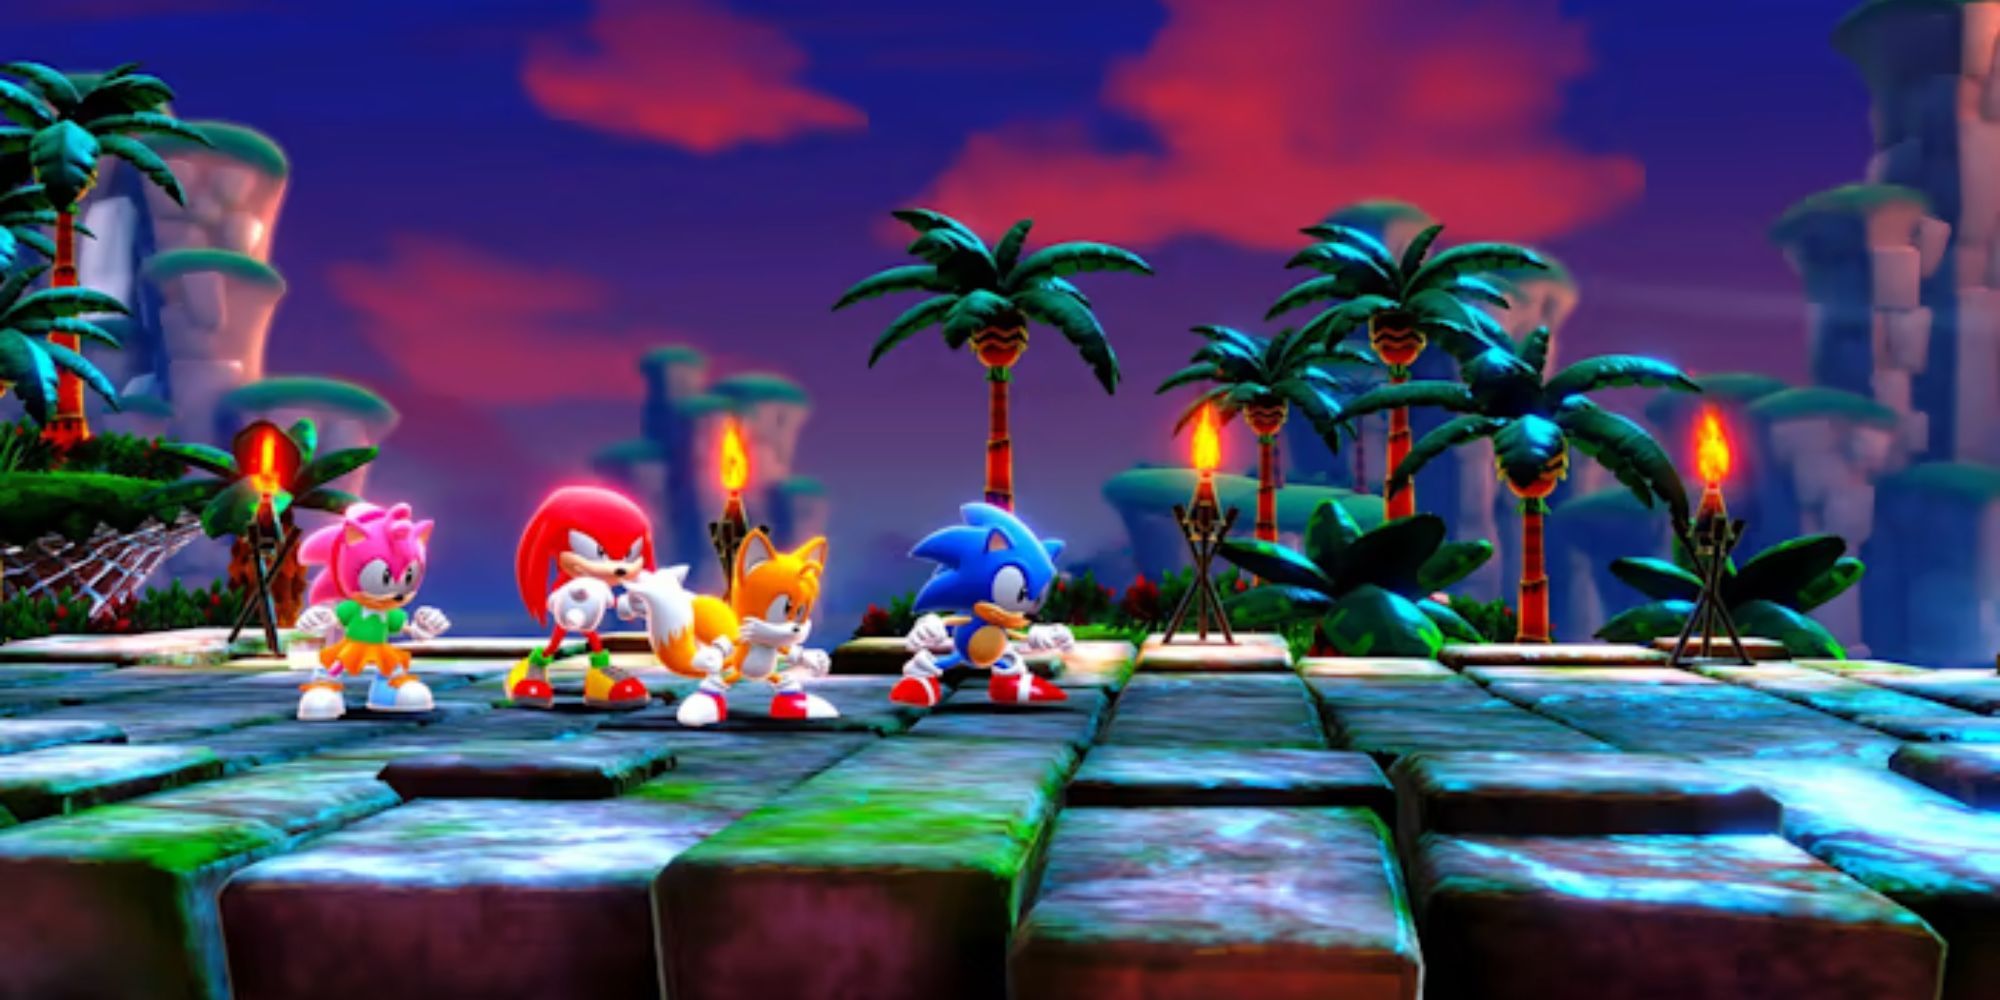 Amy, Knuckles, Tails, and Sonic prepare for battle